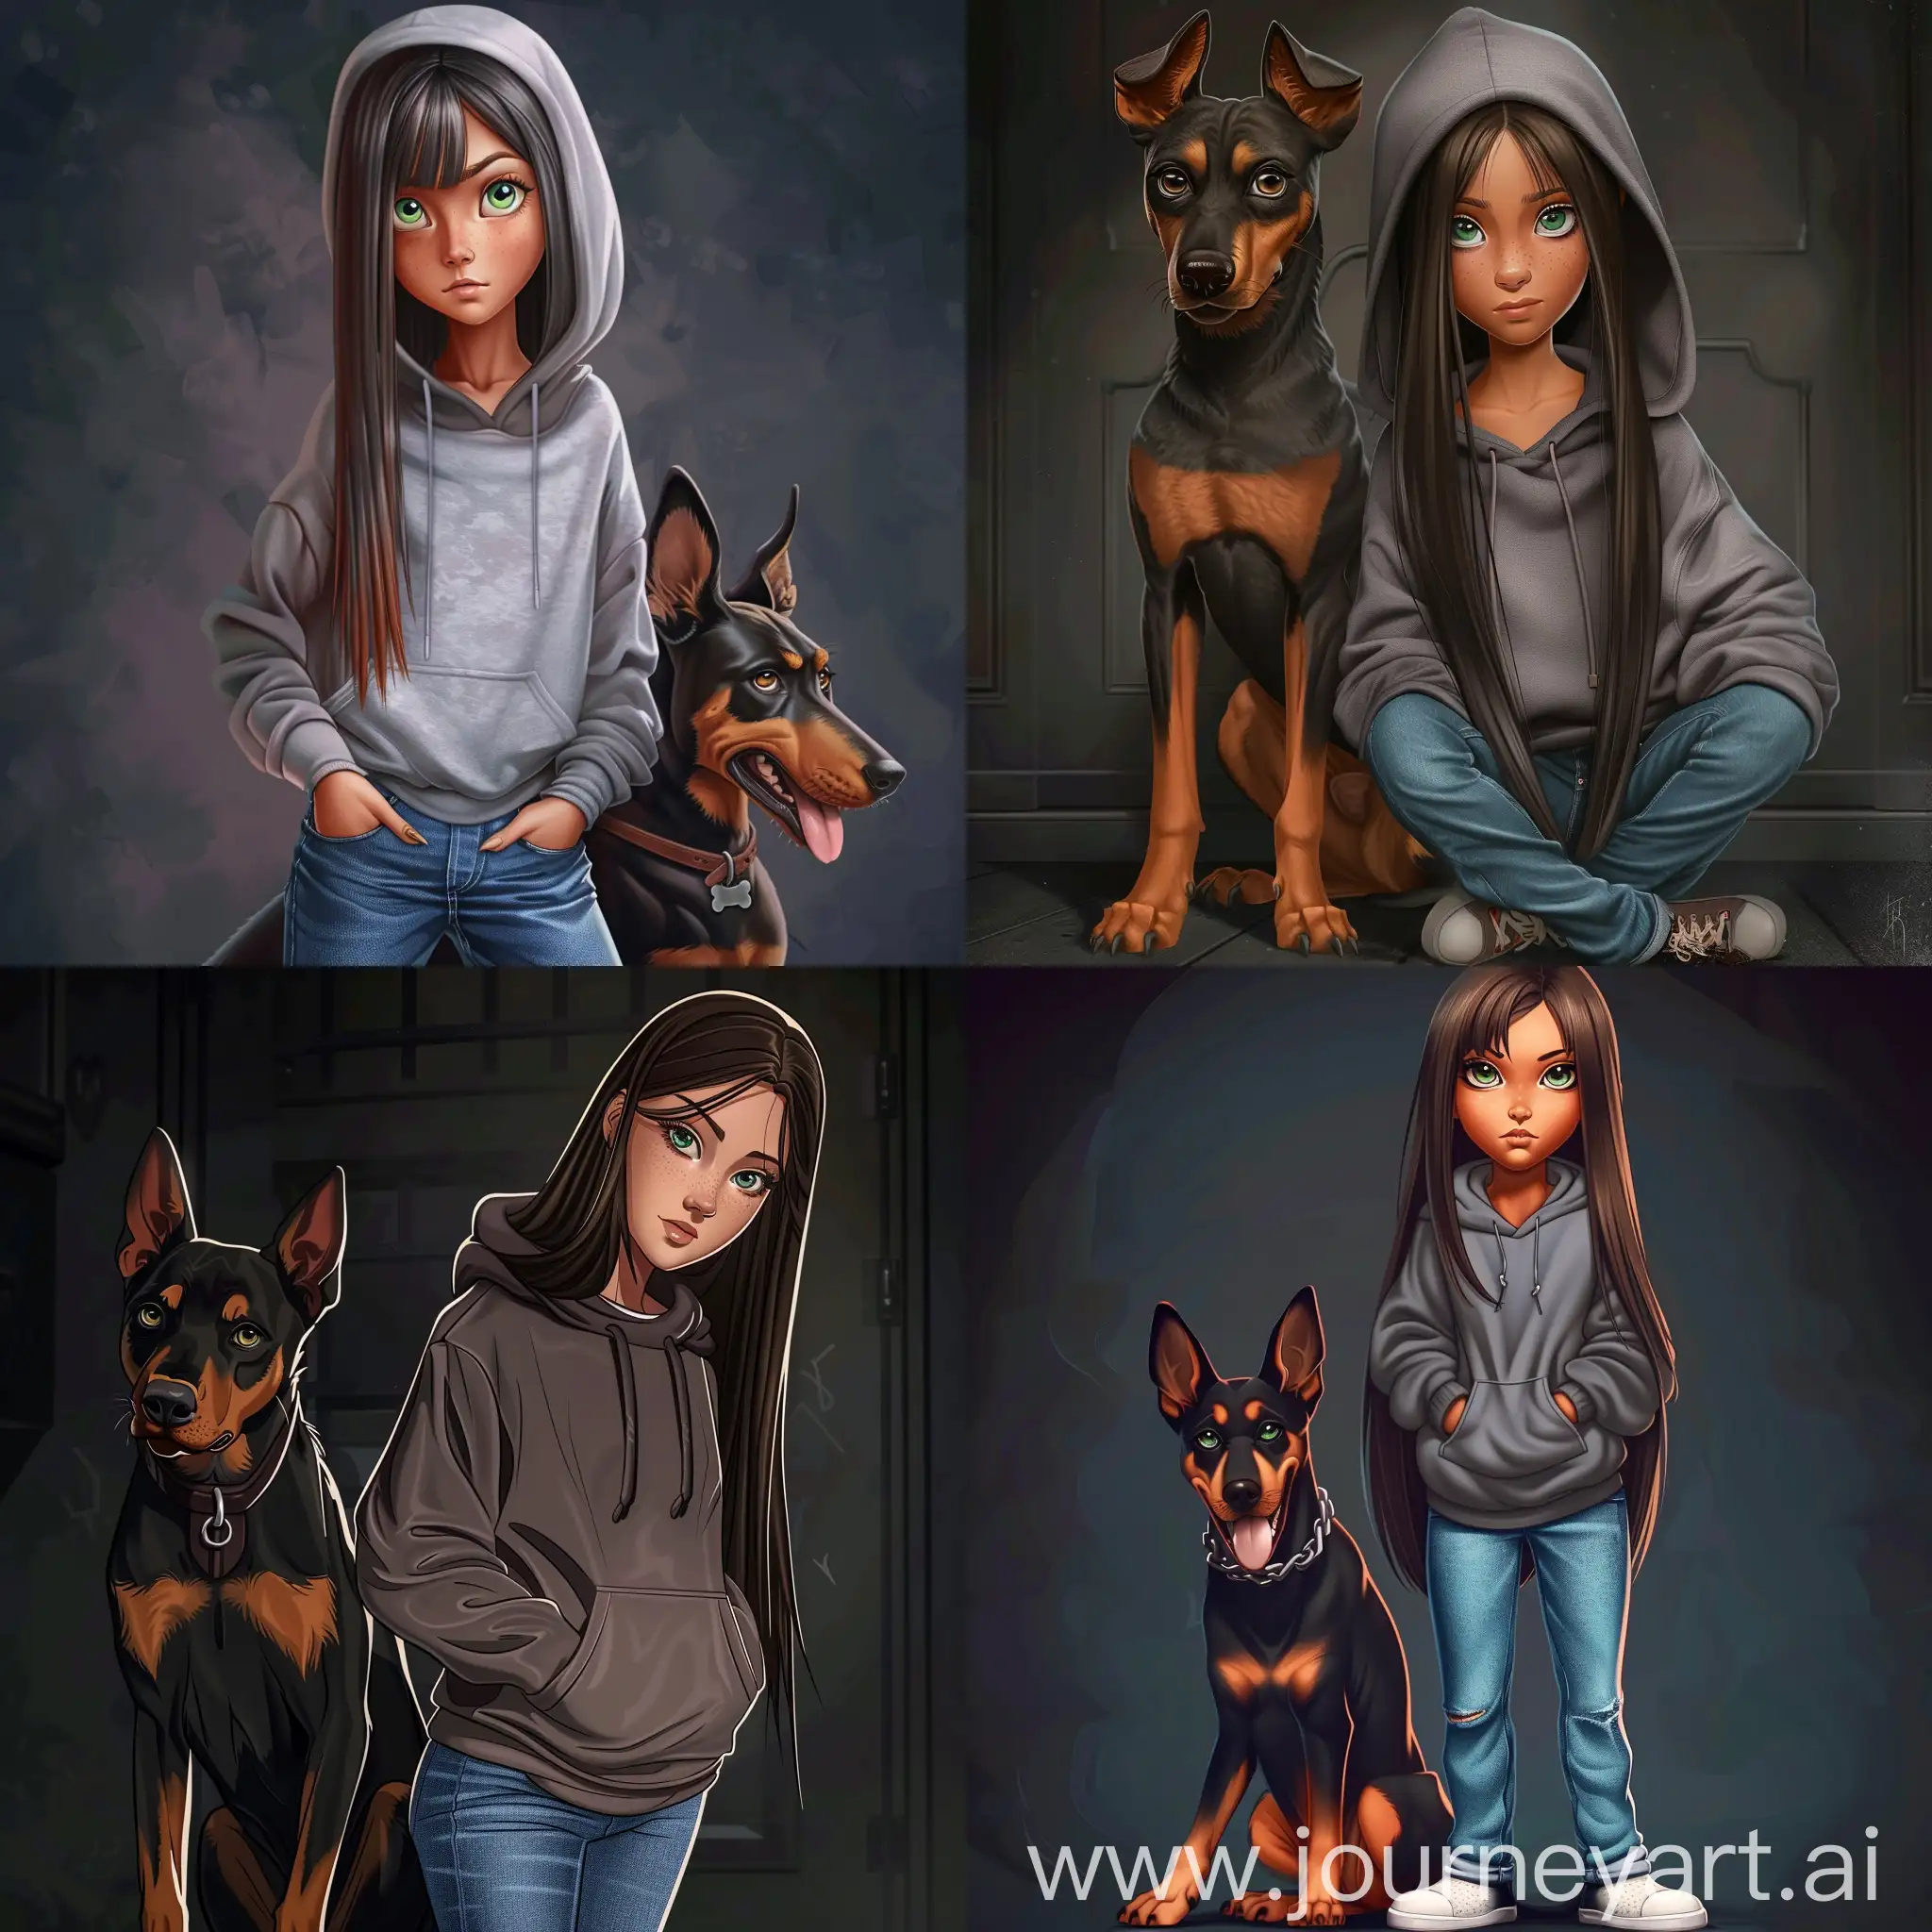 Beautiful girl, straight dark brown hair, gray-green eyes, white skin, teenager, 15 years old, dressed in jeans and an oversize hoodie, next to a doberman, high quality, high detail, dark background, cartoon art